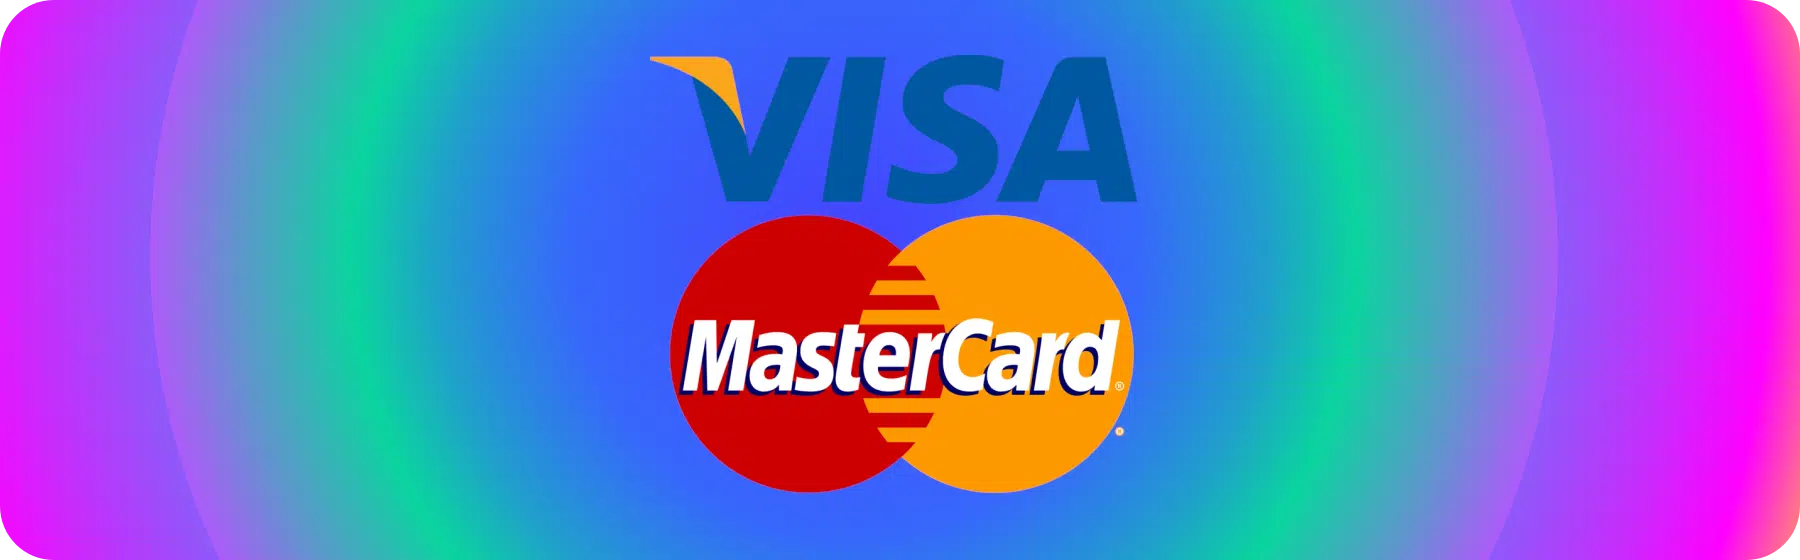 picture for visa and mastercard with logos